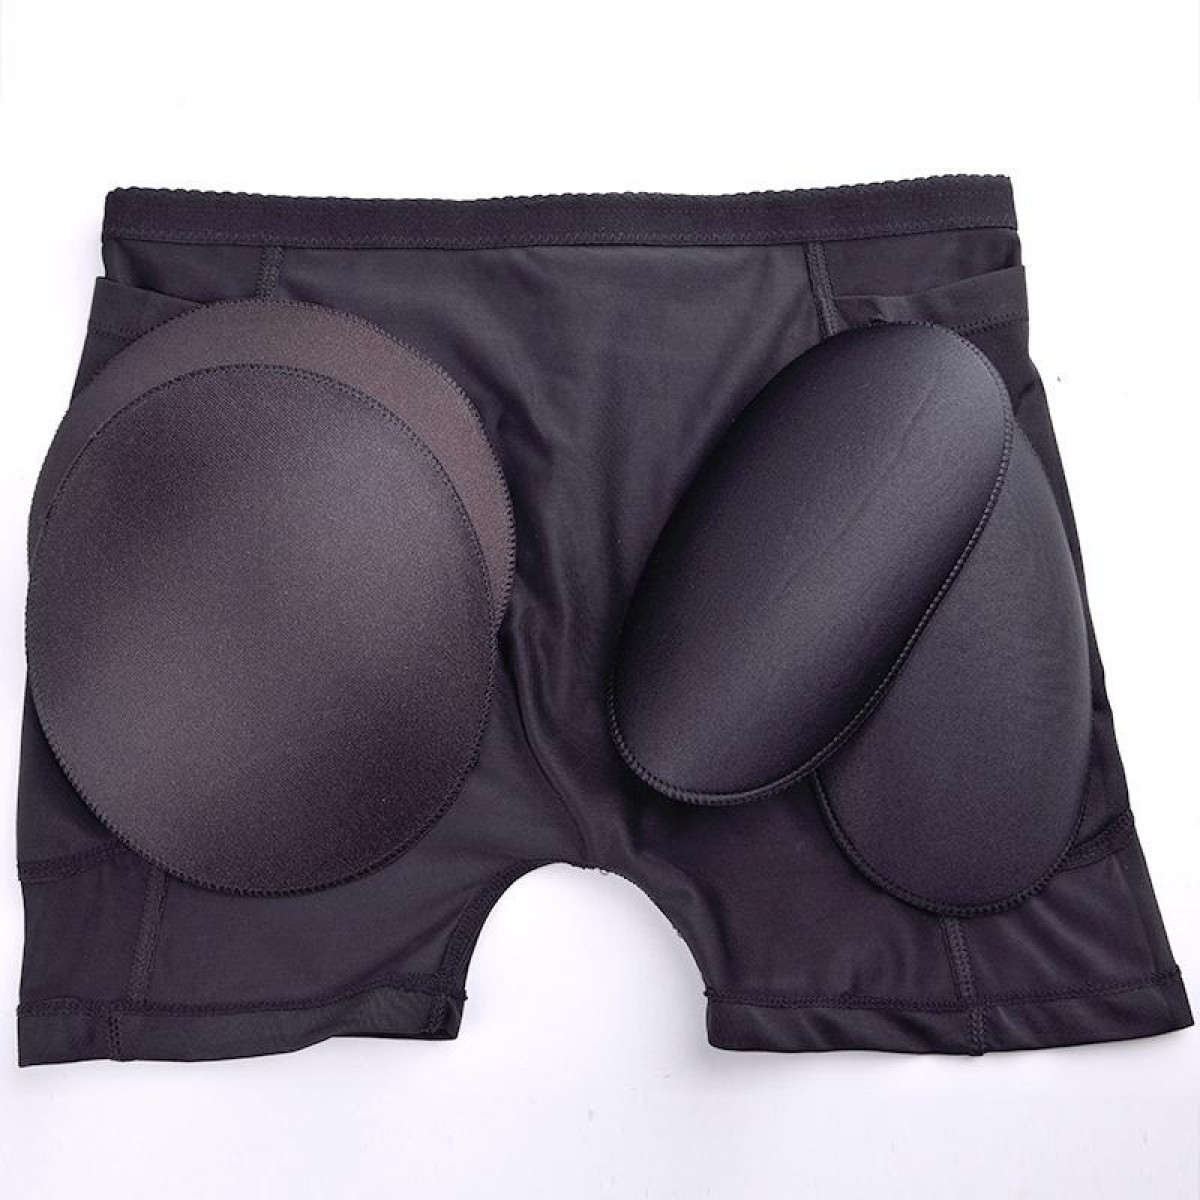 Full Buttocks and Hips Sponge Cushion Insert to Increase Hips and Hips Lifting Panties, Size: M(Black)